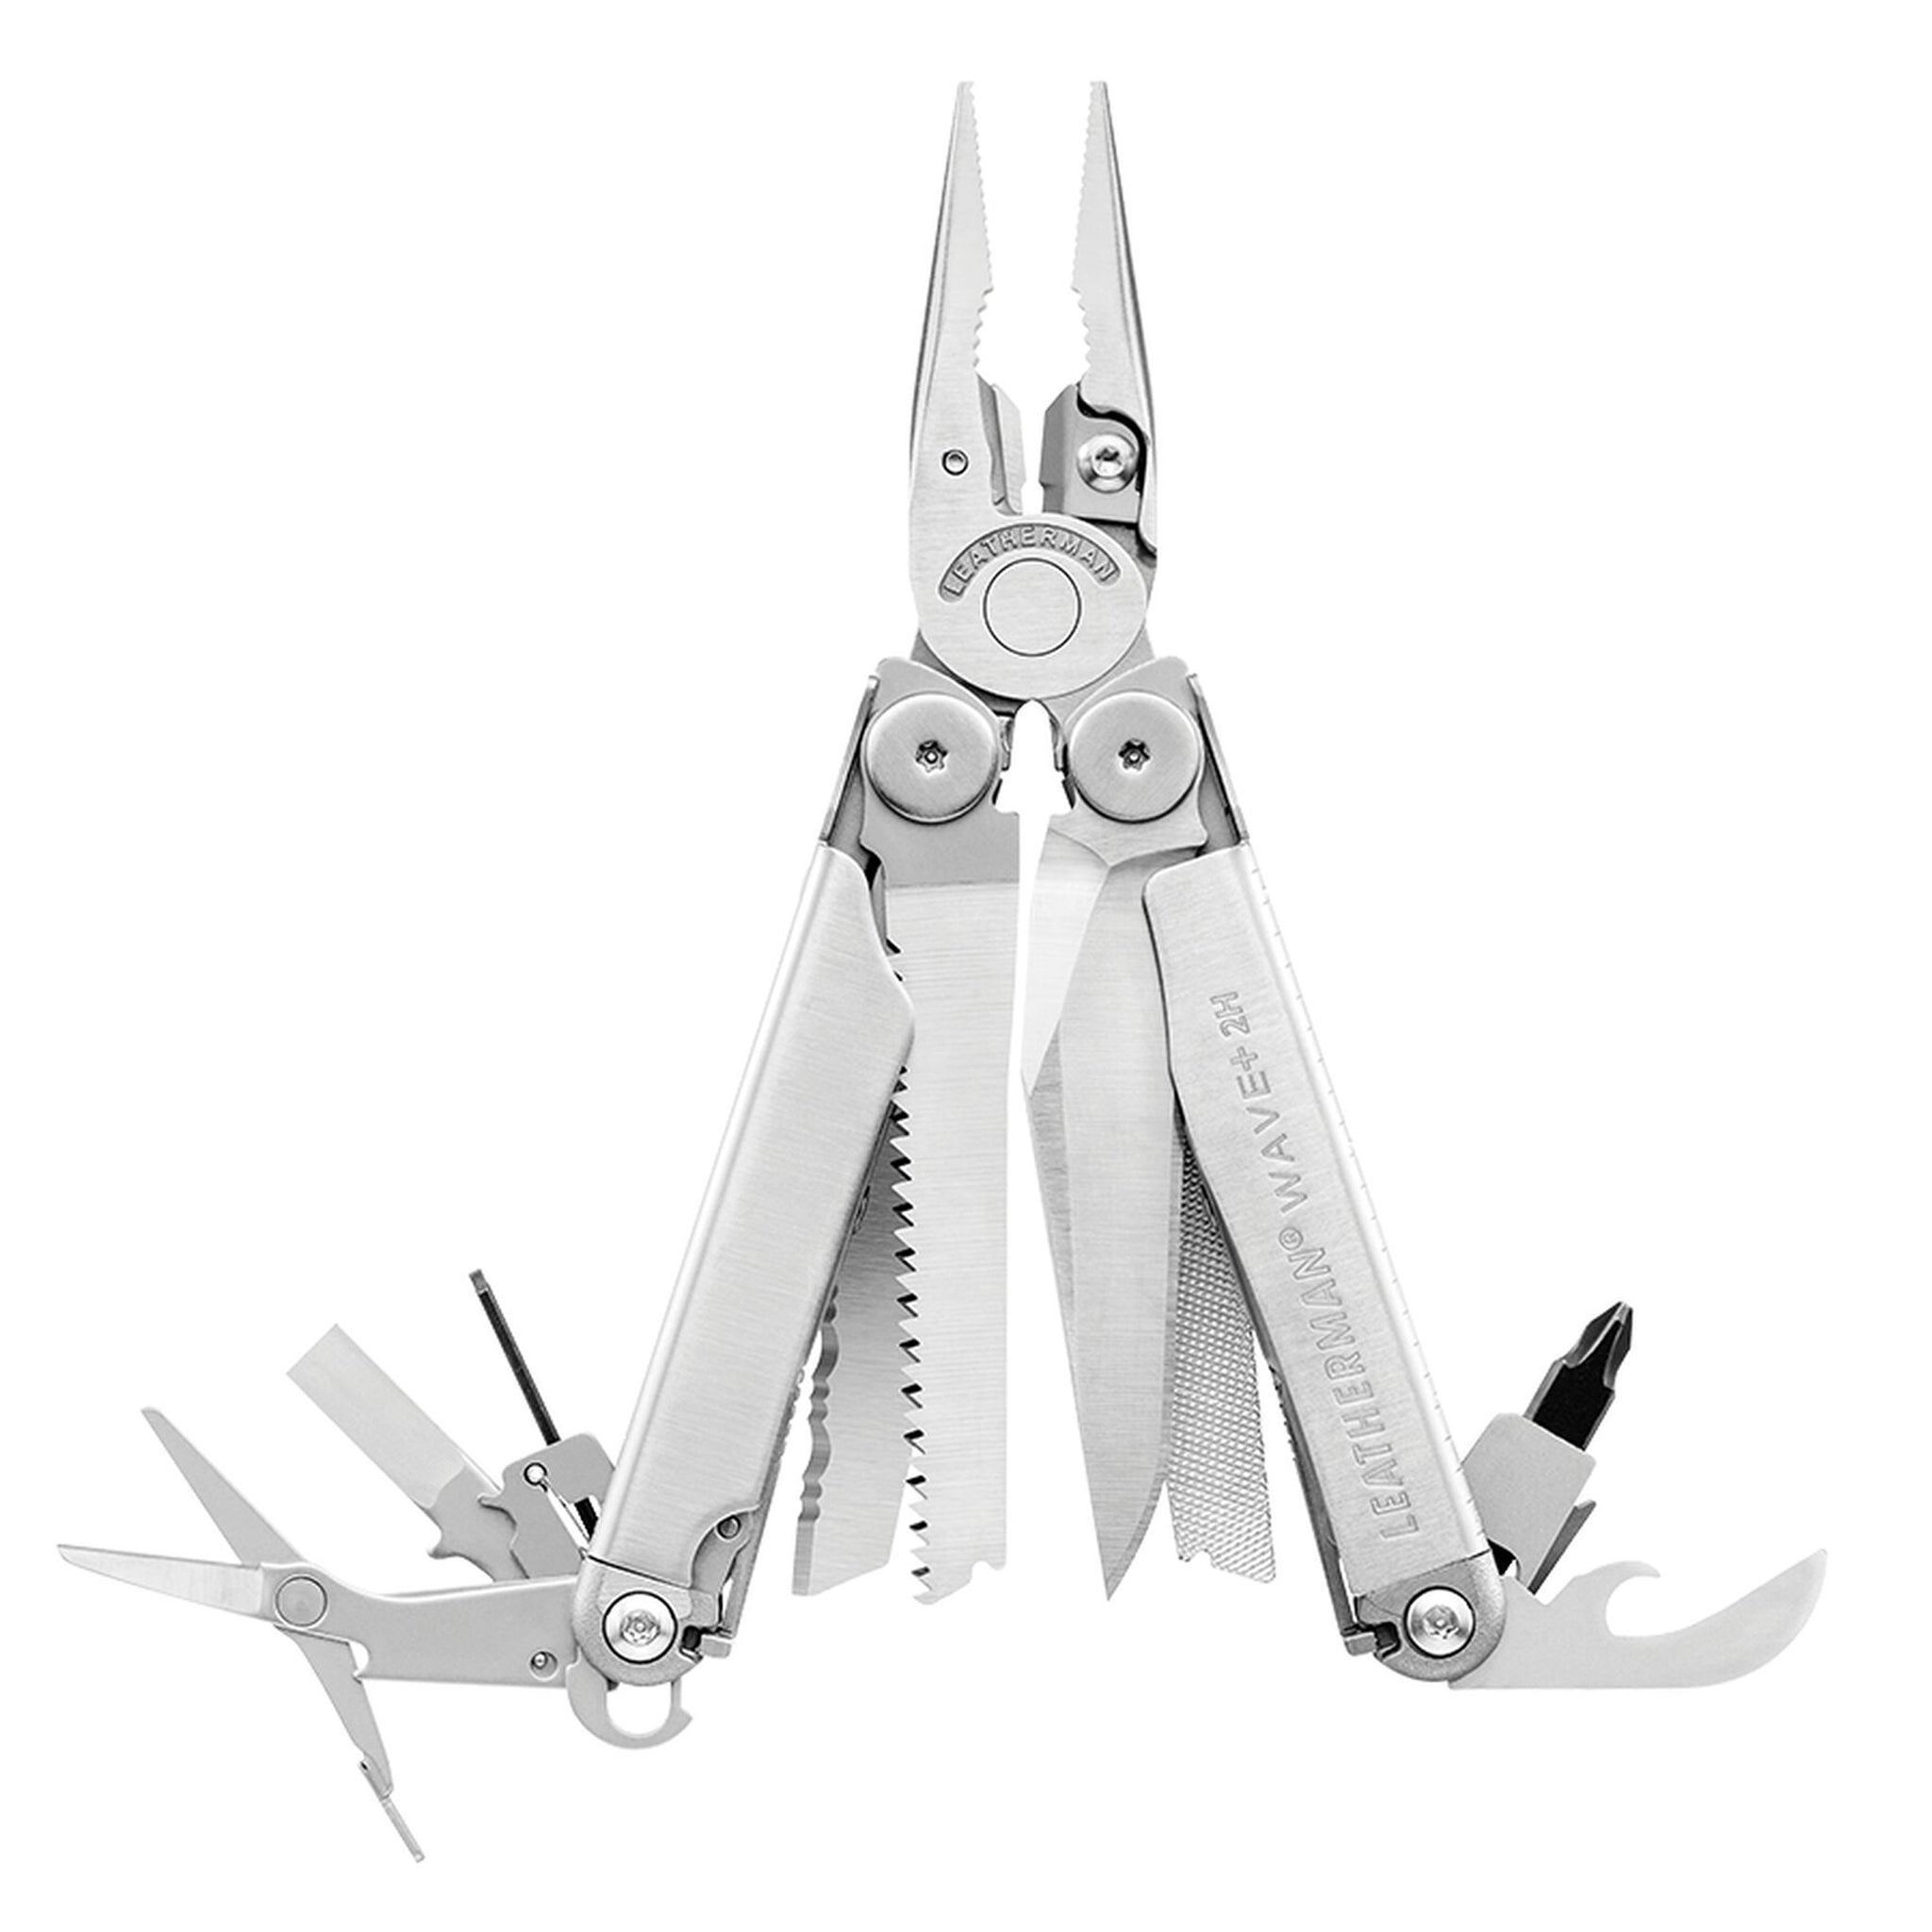 Leatherman 2H Wave+ Multitool stainless